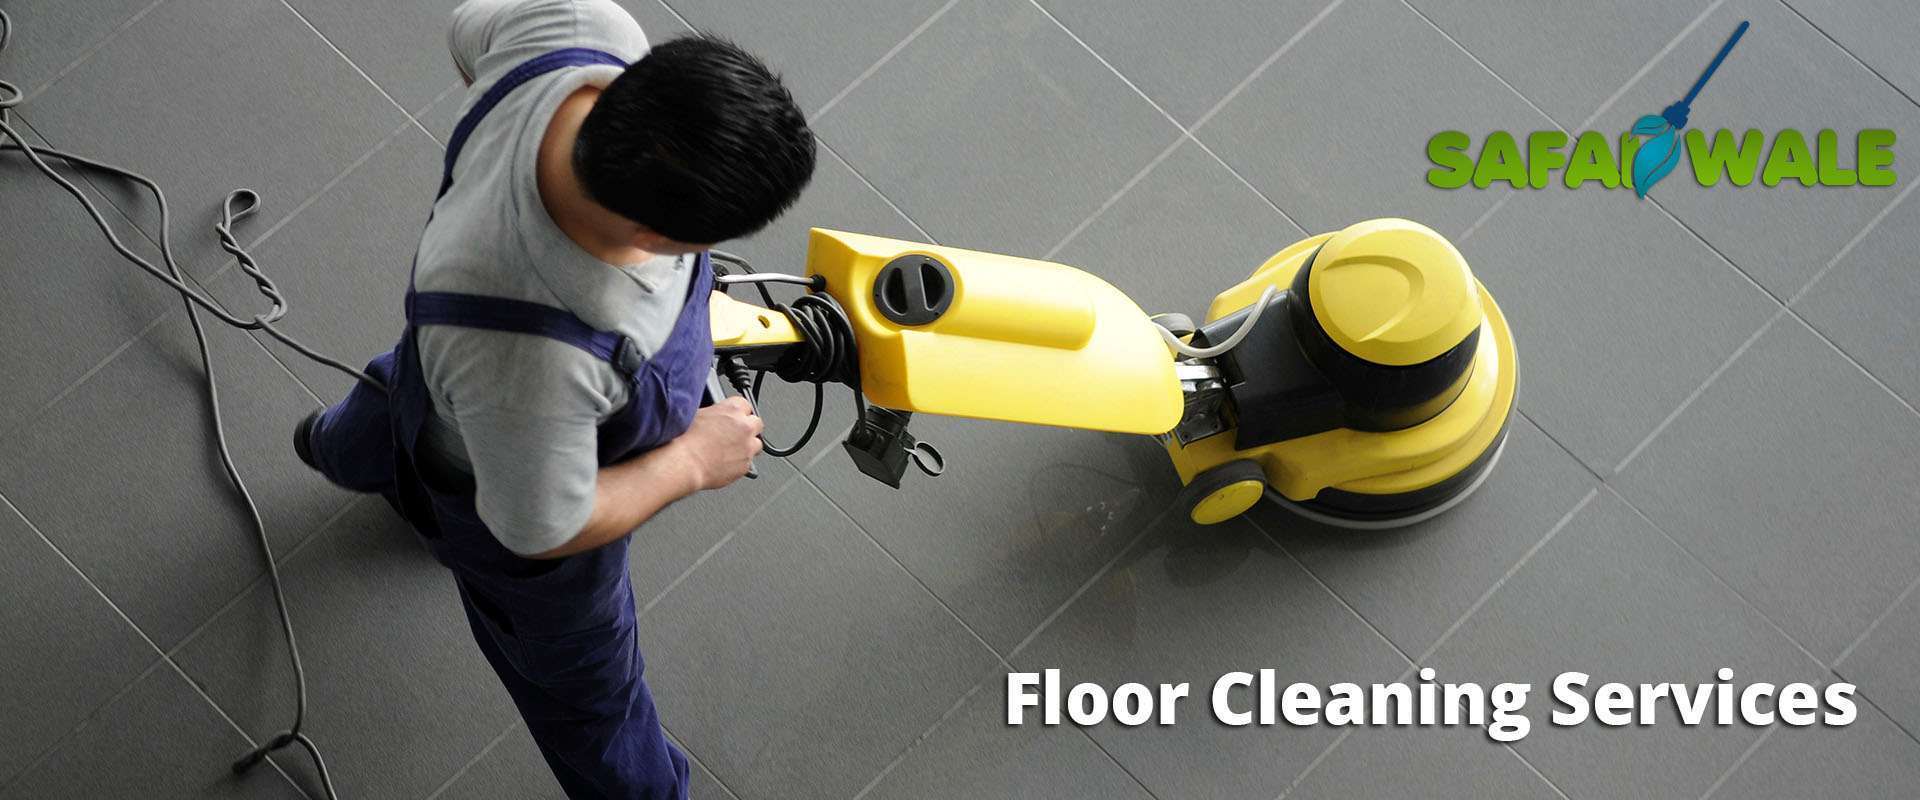 Floor Cleaning Services In Green Park, New Delhi